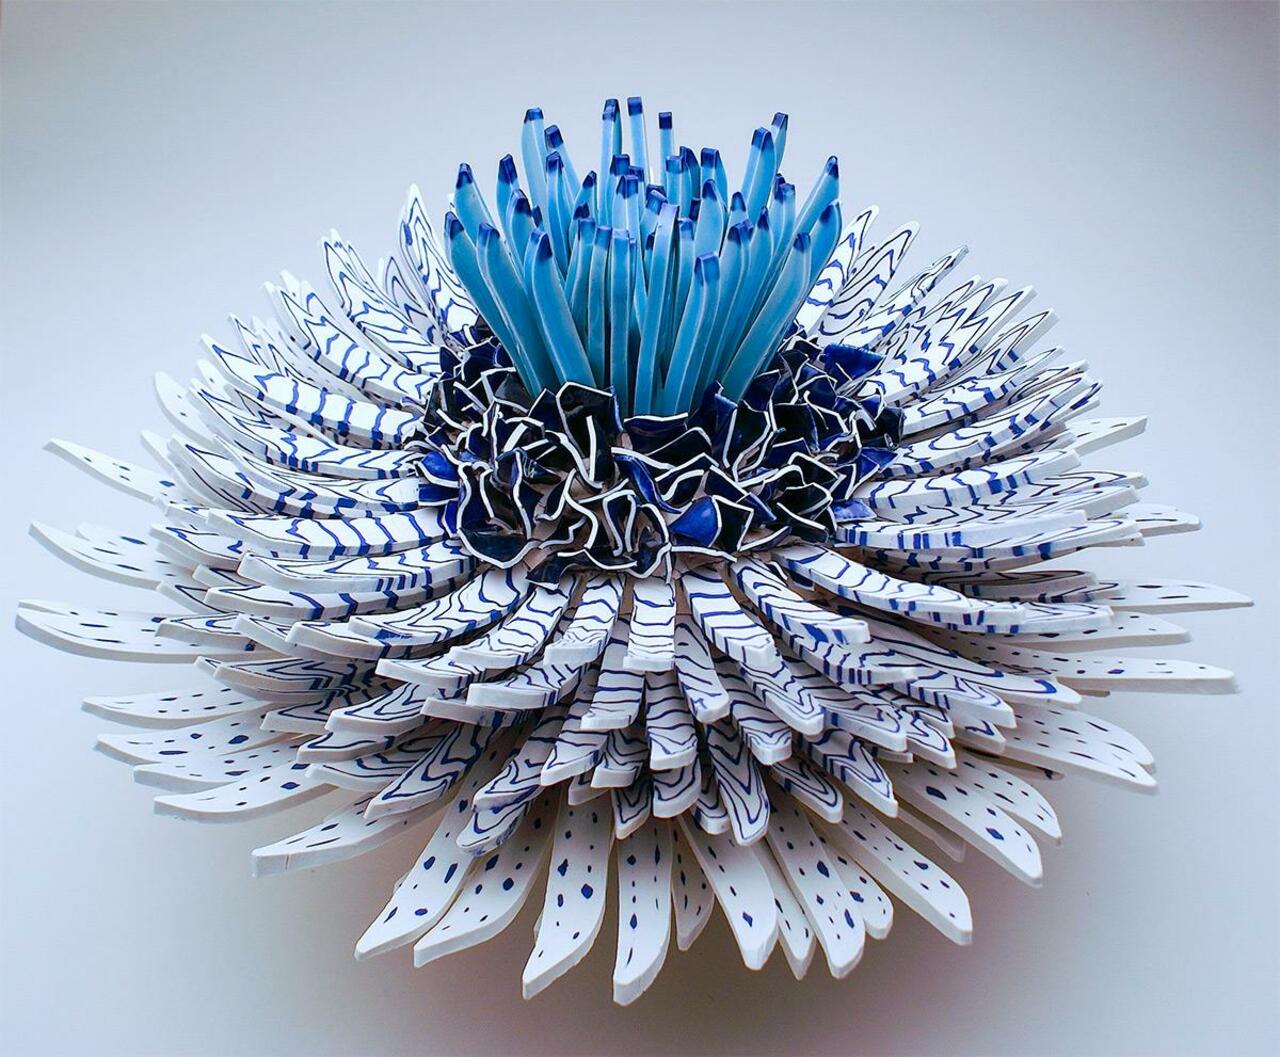 New Blooms of Ceramic Shards by Zemer Peled #art #feedly http://www.thisiscolossal.com/2015/05/new-blooms-of-ceramic-shards-by-zemer-peled/ http://t.co/QDZJLKAb6E